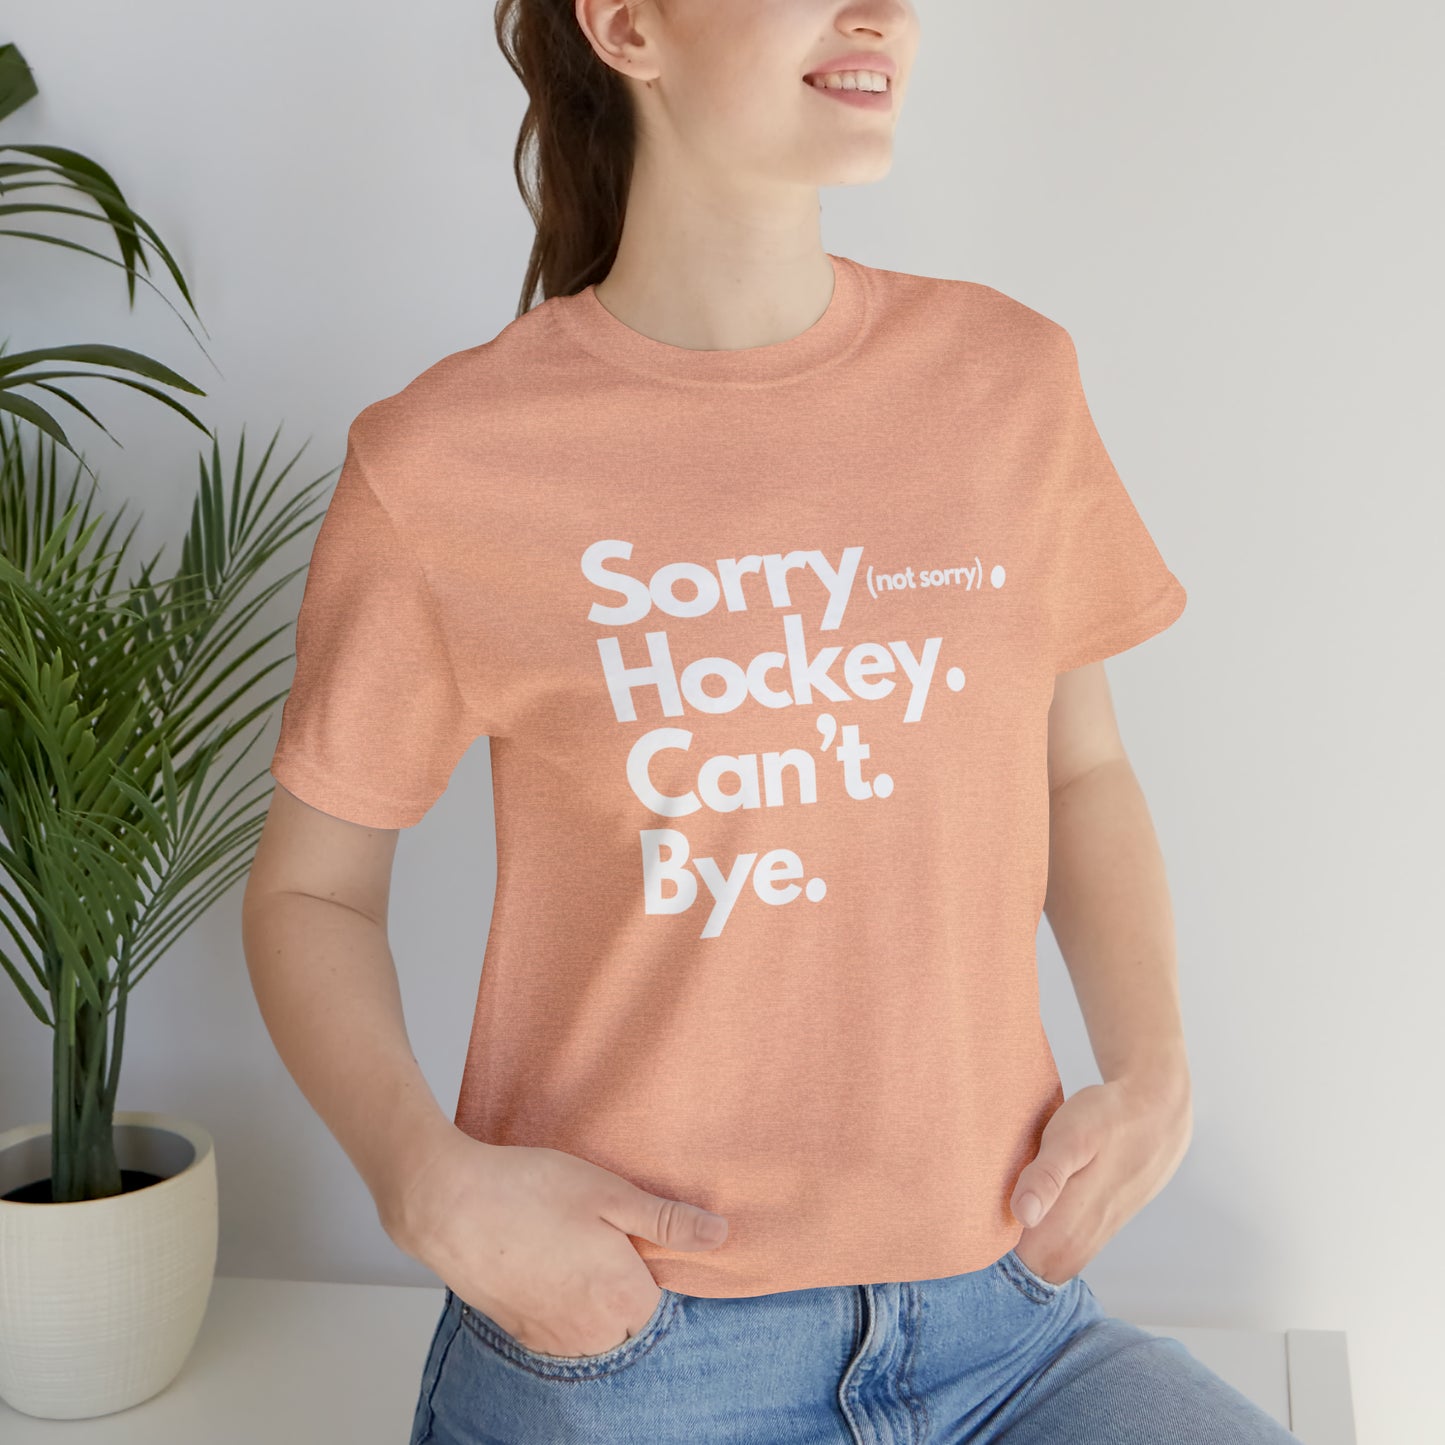 Sorry. Can't. Unisex Bella + Canvas Short Sleeve Tee